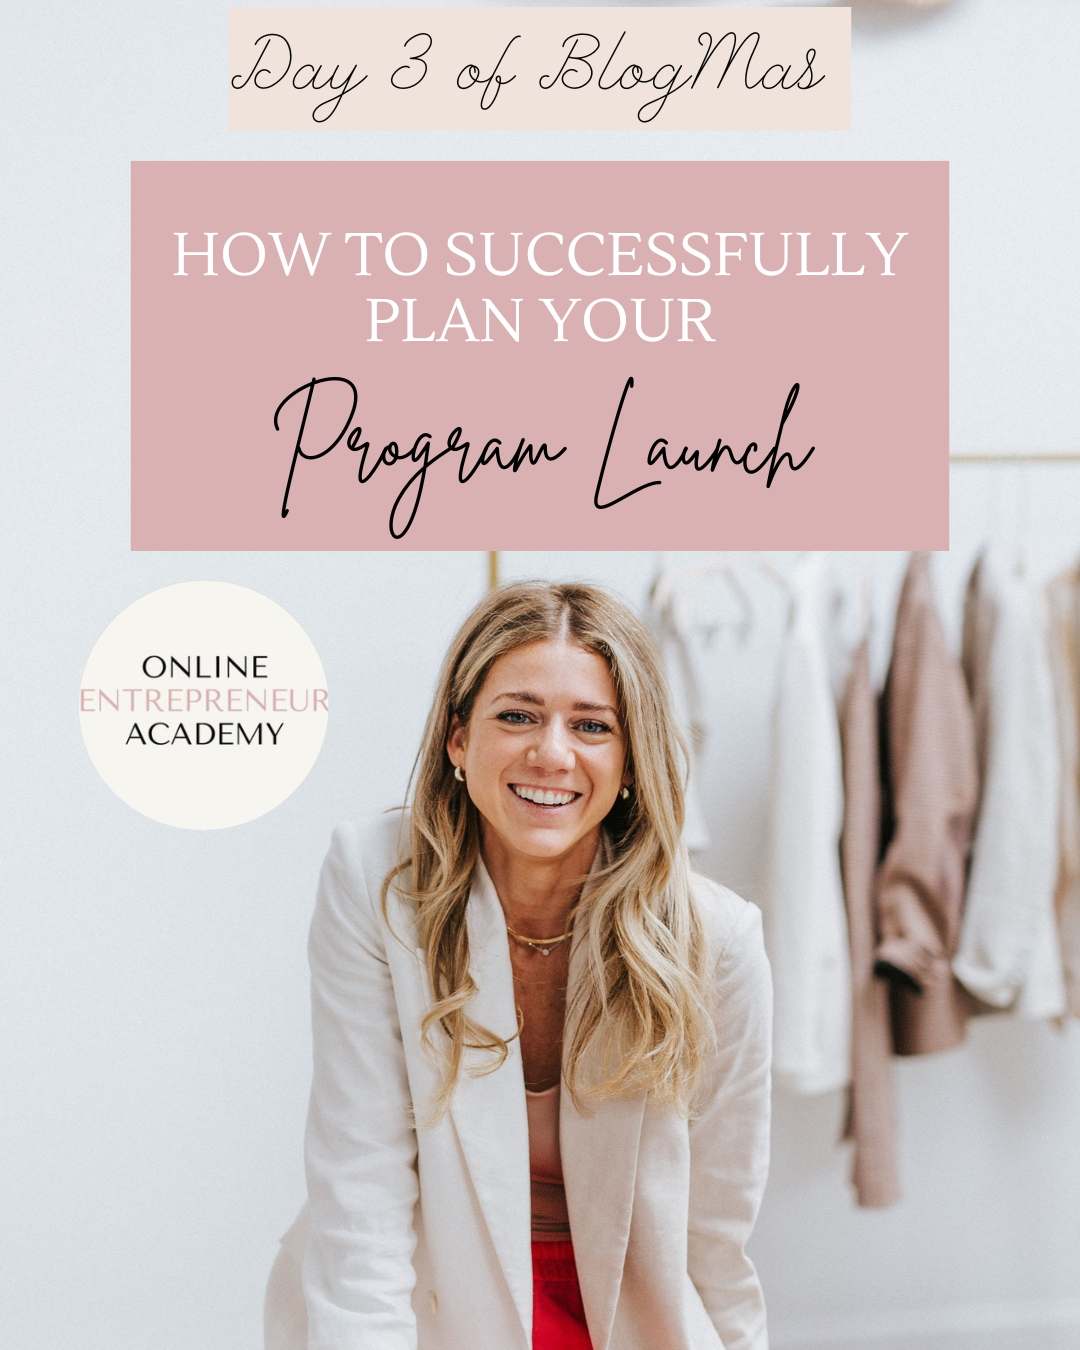 How To Successfully Plan Your Program Launch